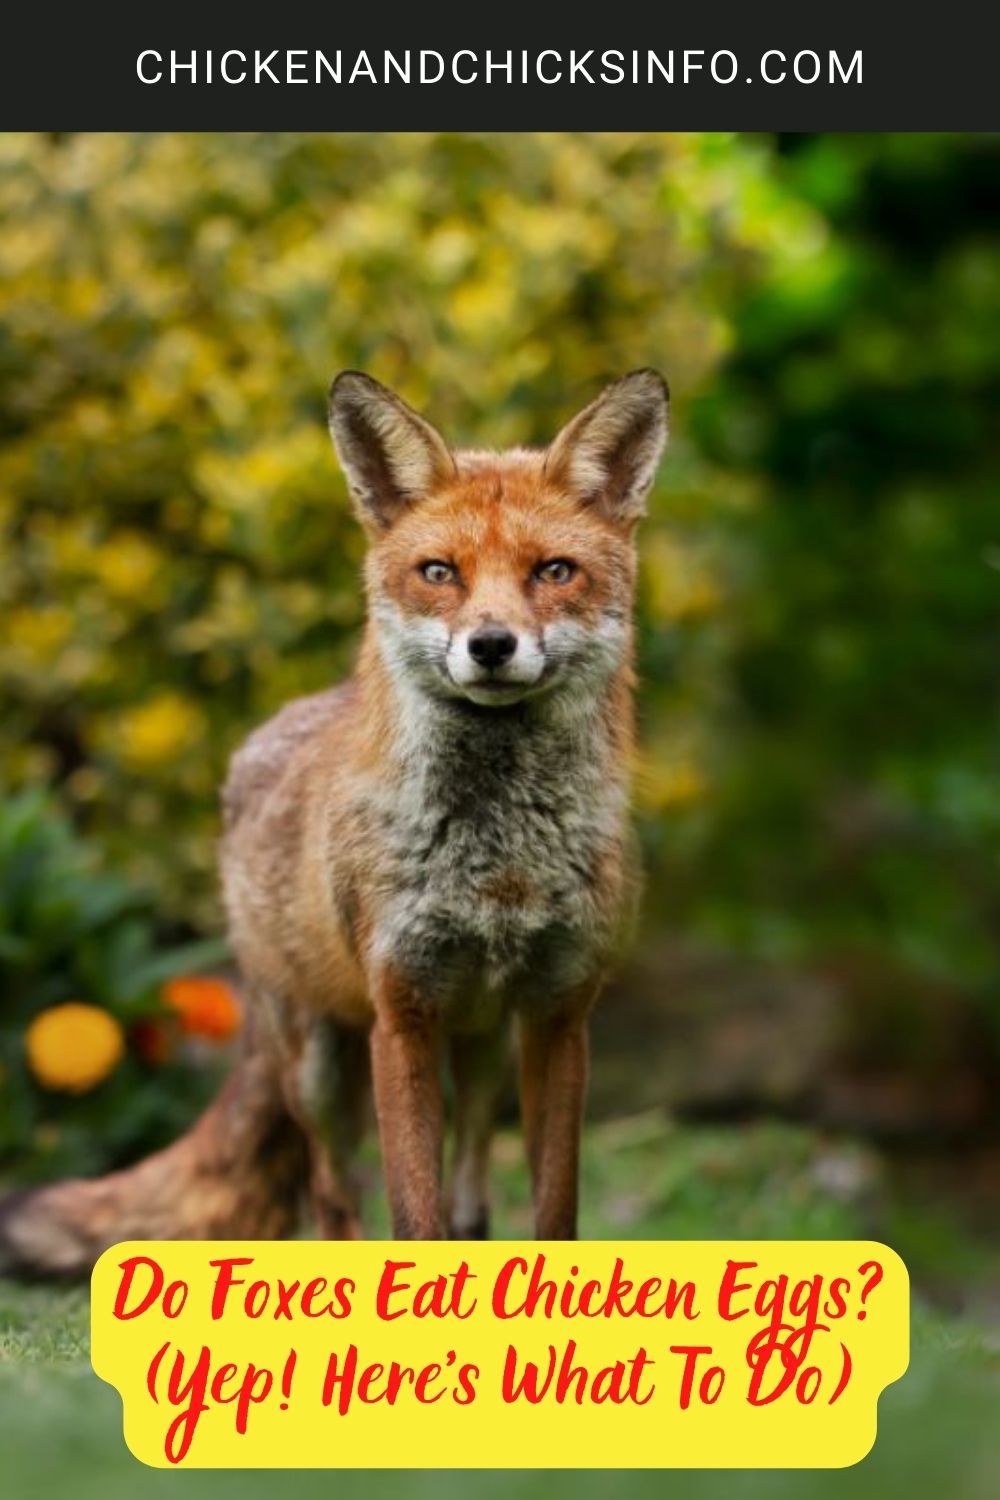 Do Foxes Eat Chicken Eggs? (Yep! Here's What To Do) poster.
